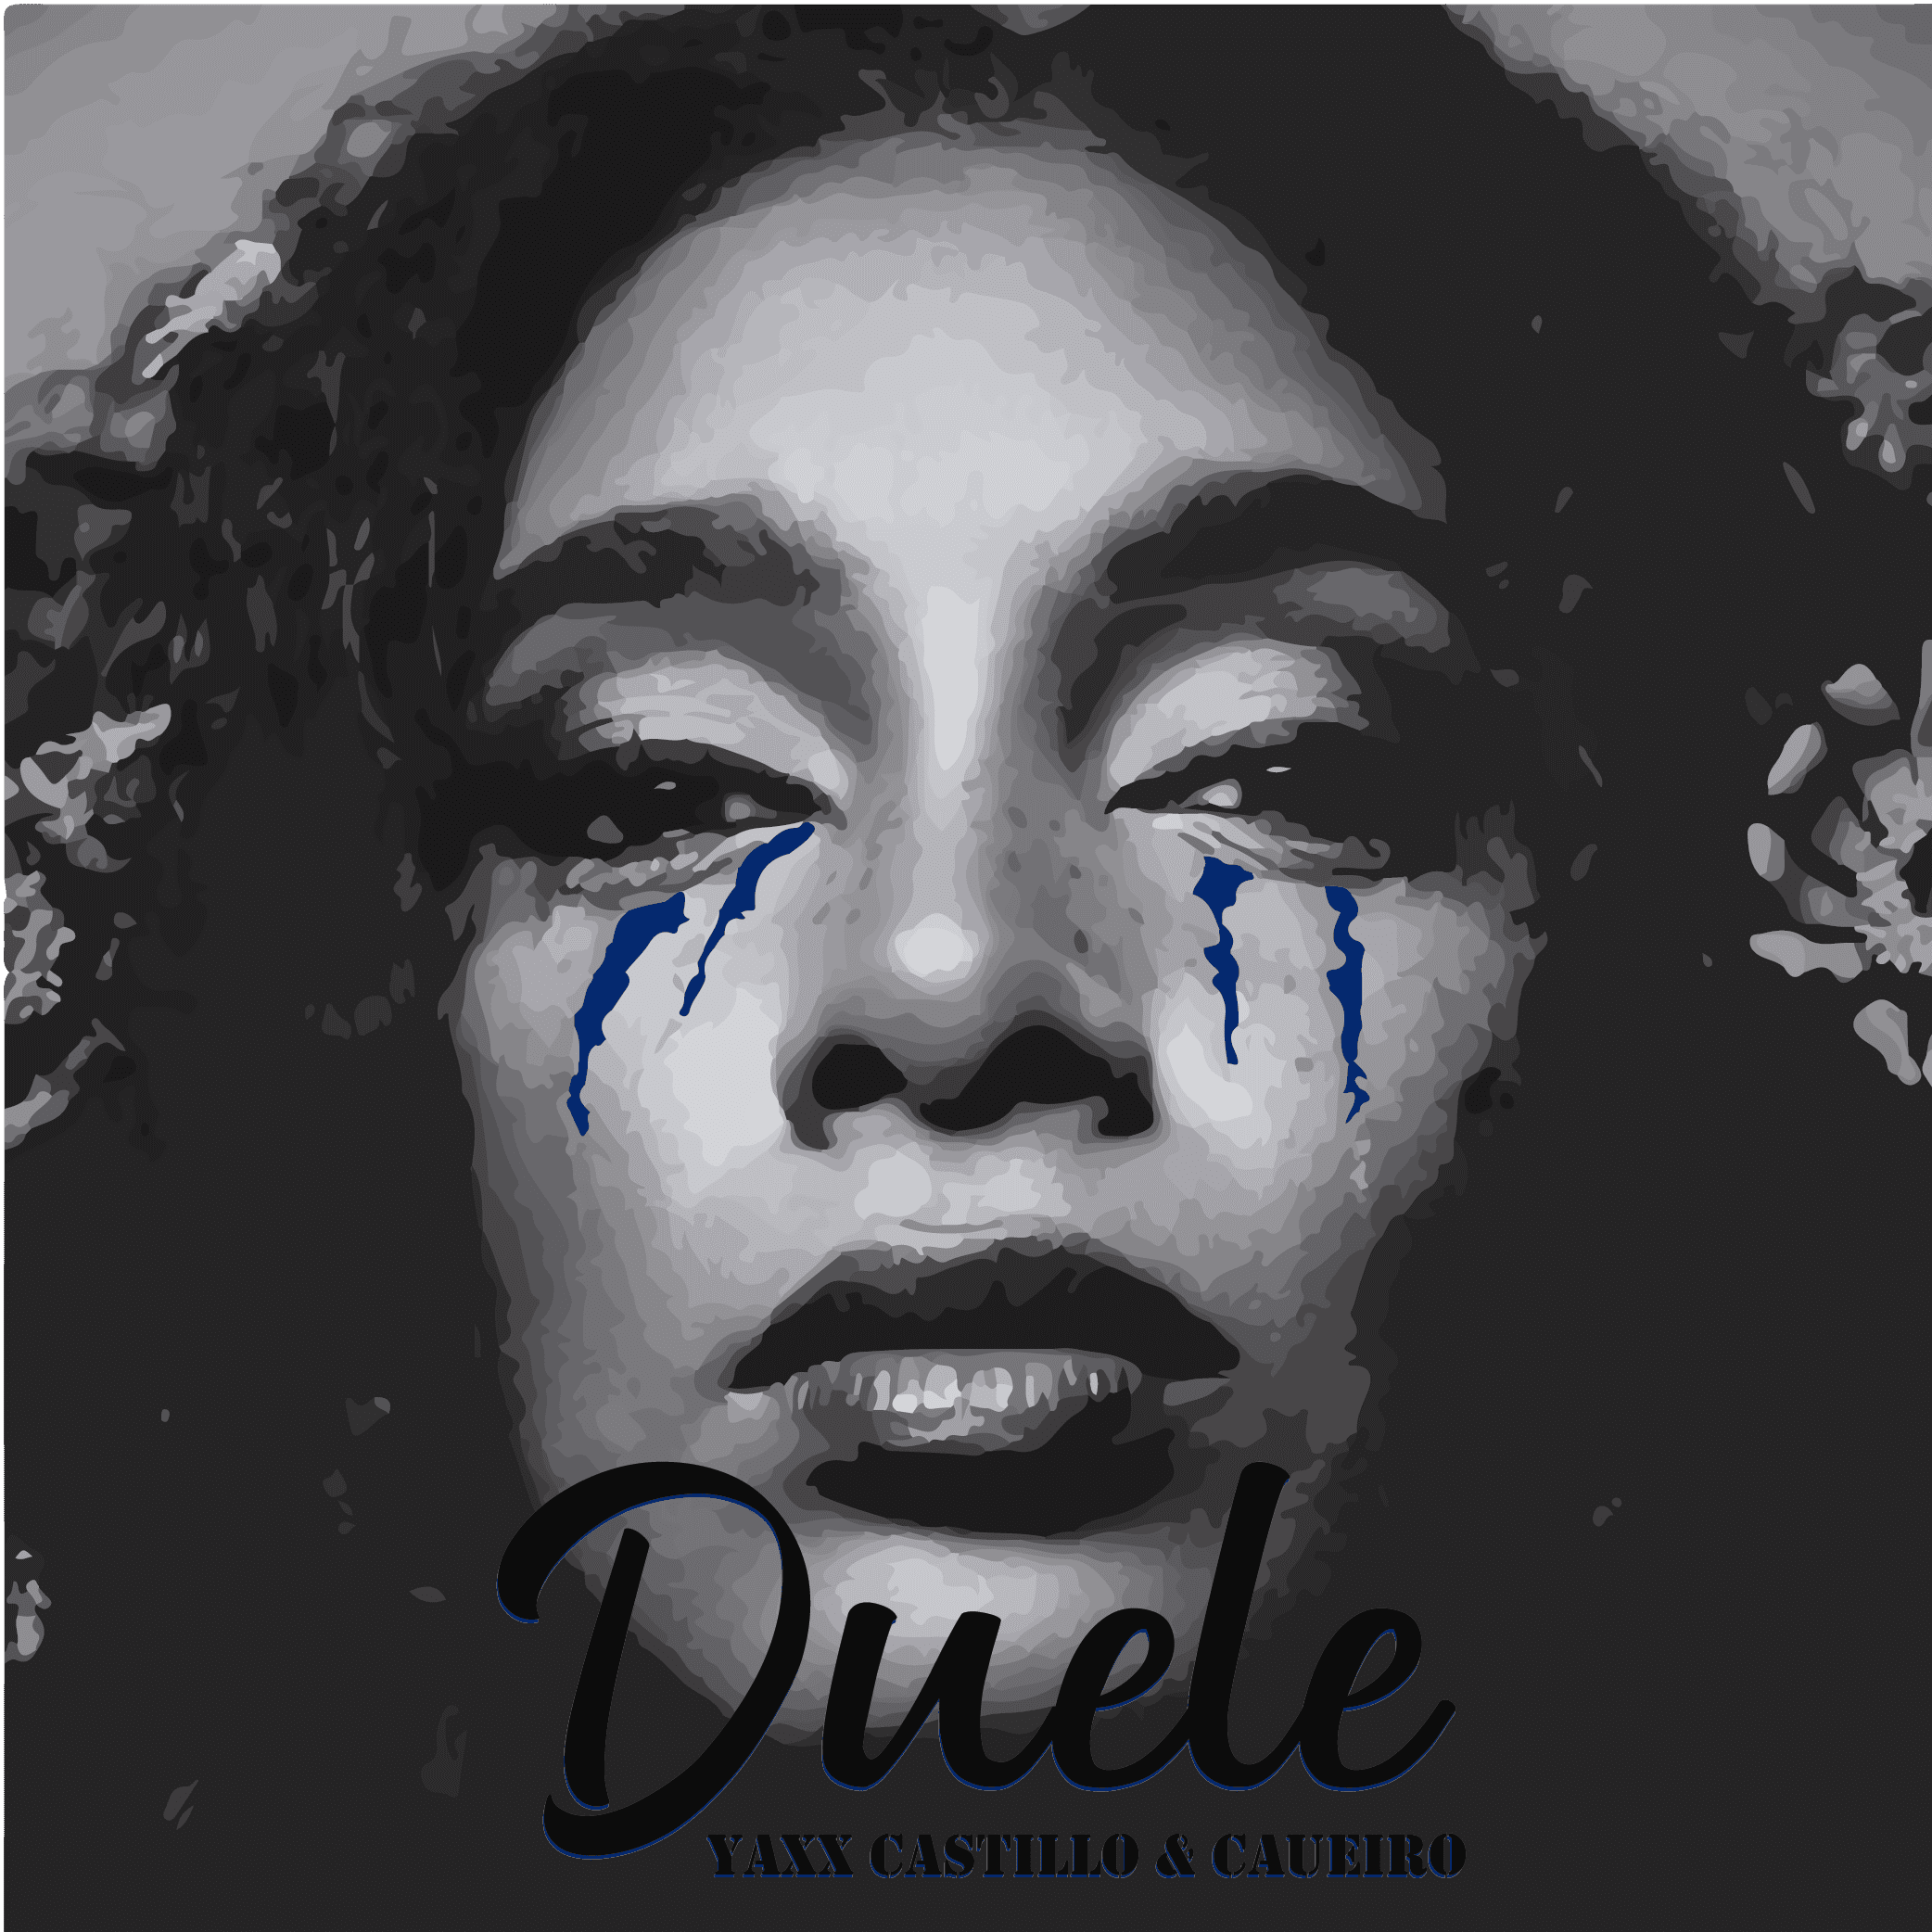 Cover art for Yaxx Castillo's song: "Duele"